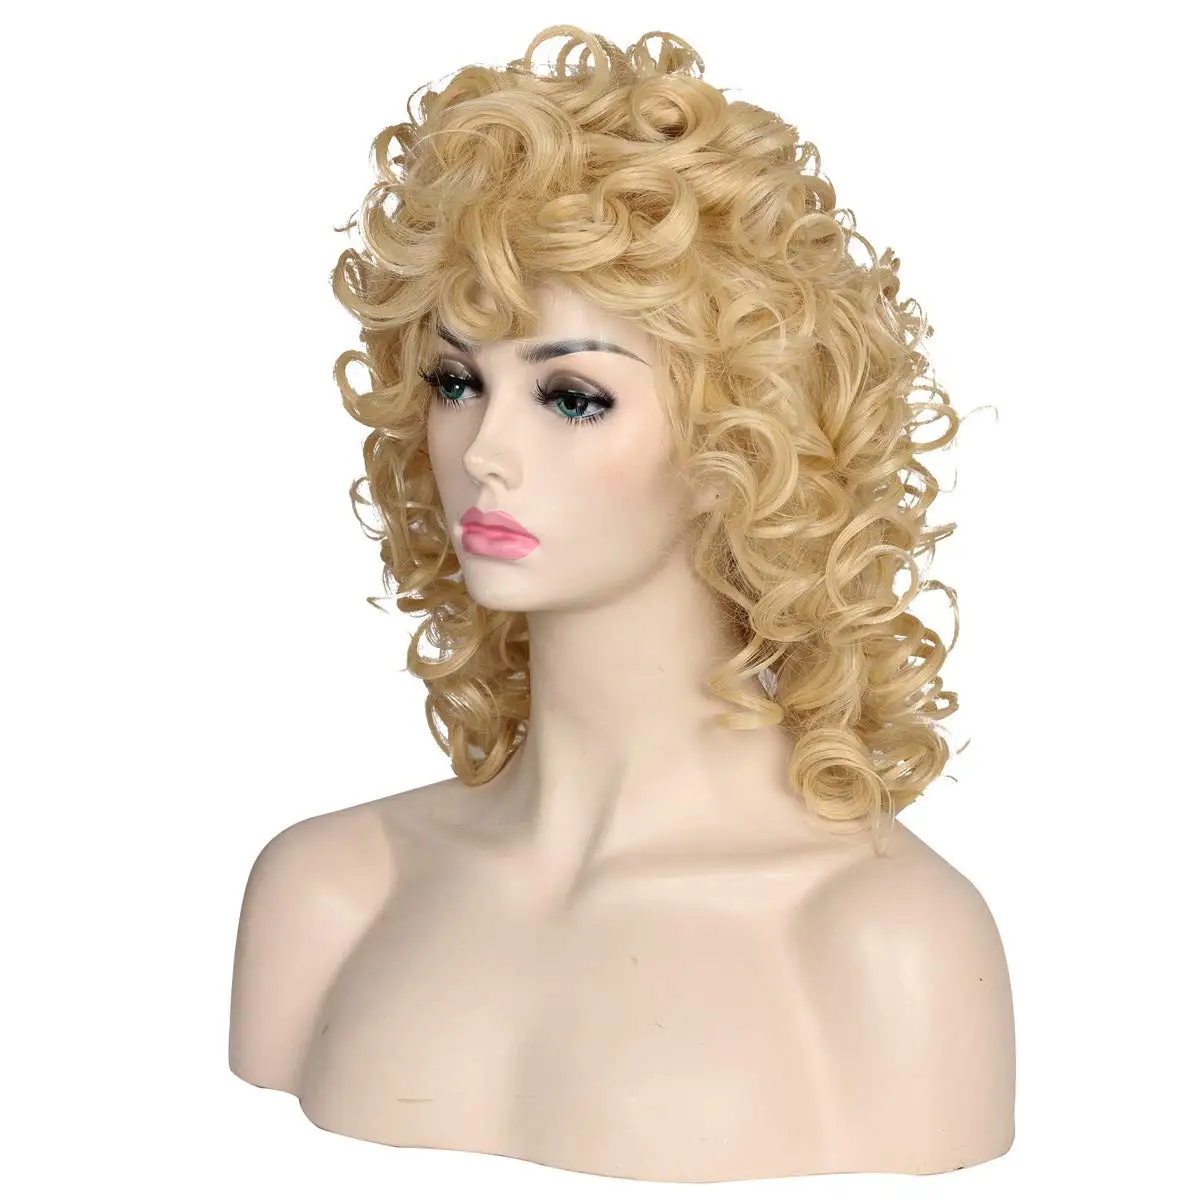 

Kyo Medium Long Curly Blonde 80S Rocker Wig for DOlly Parton Cosplay Hair for Halloween